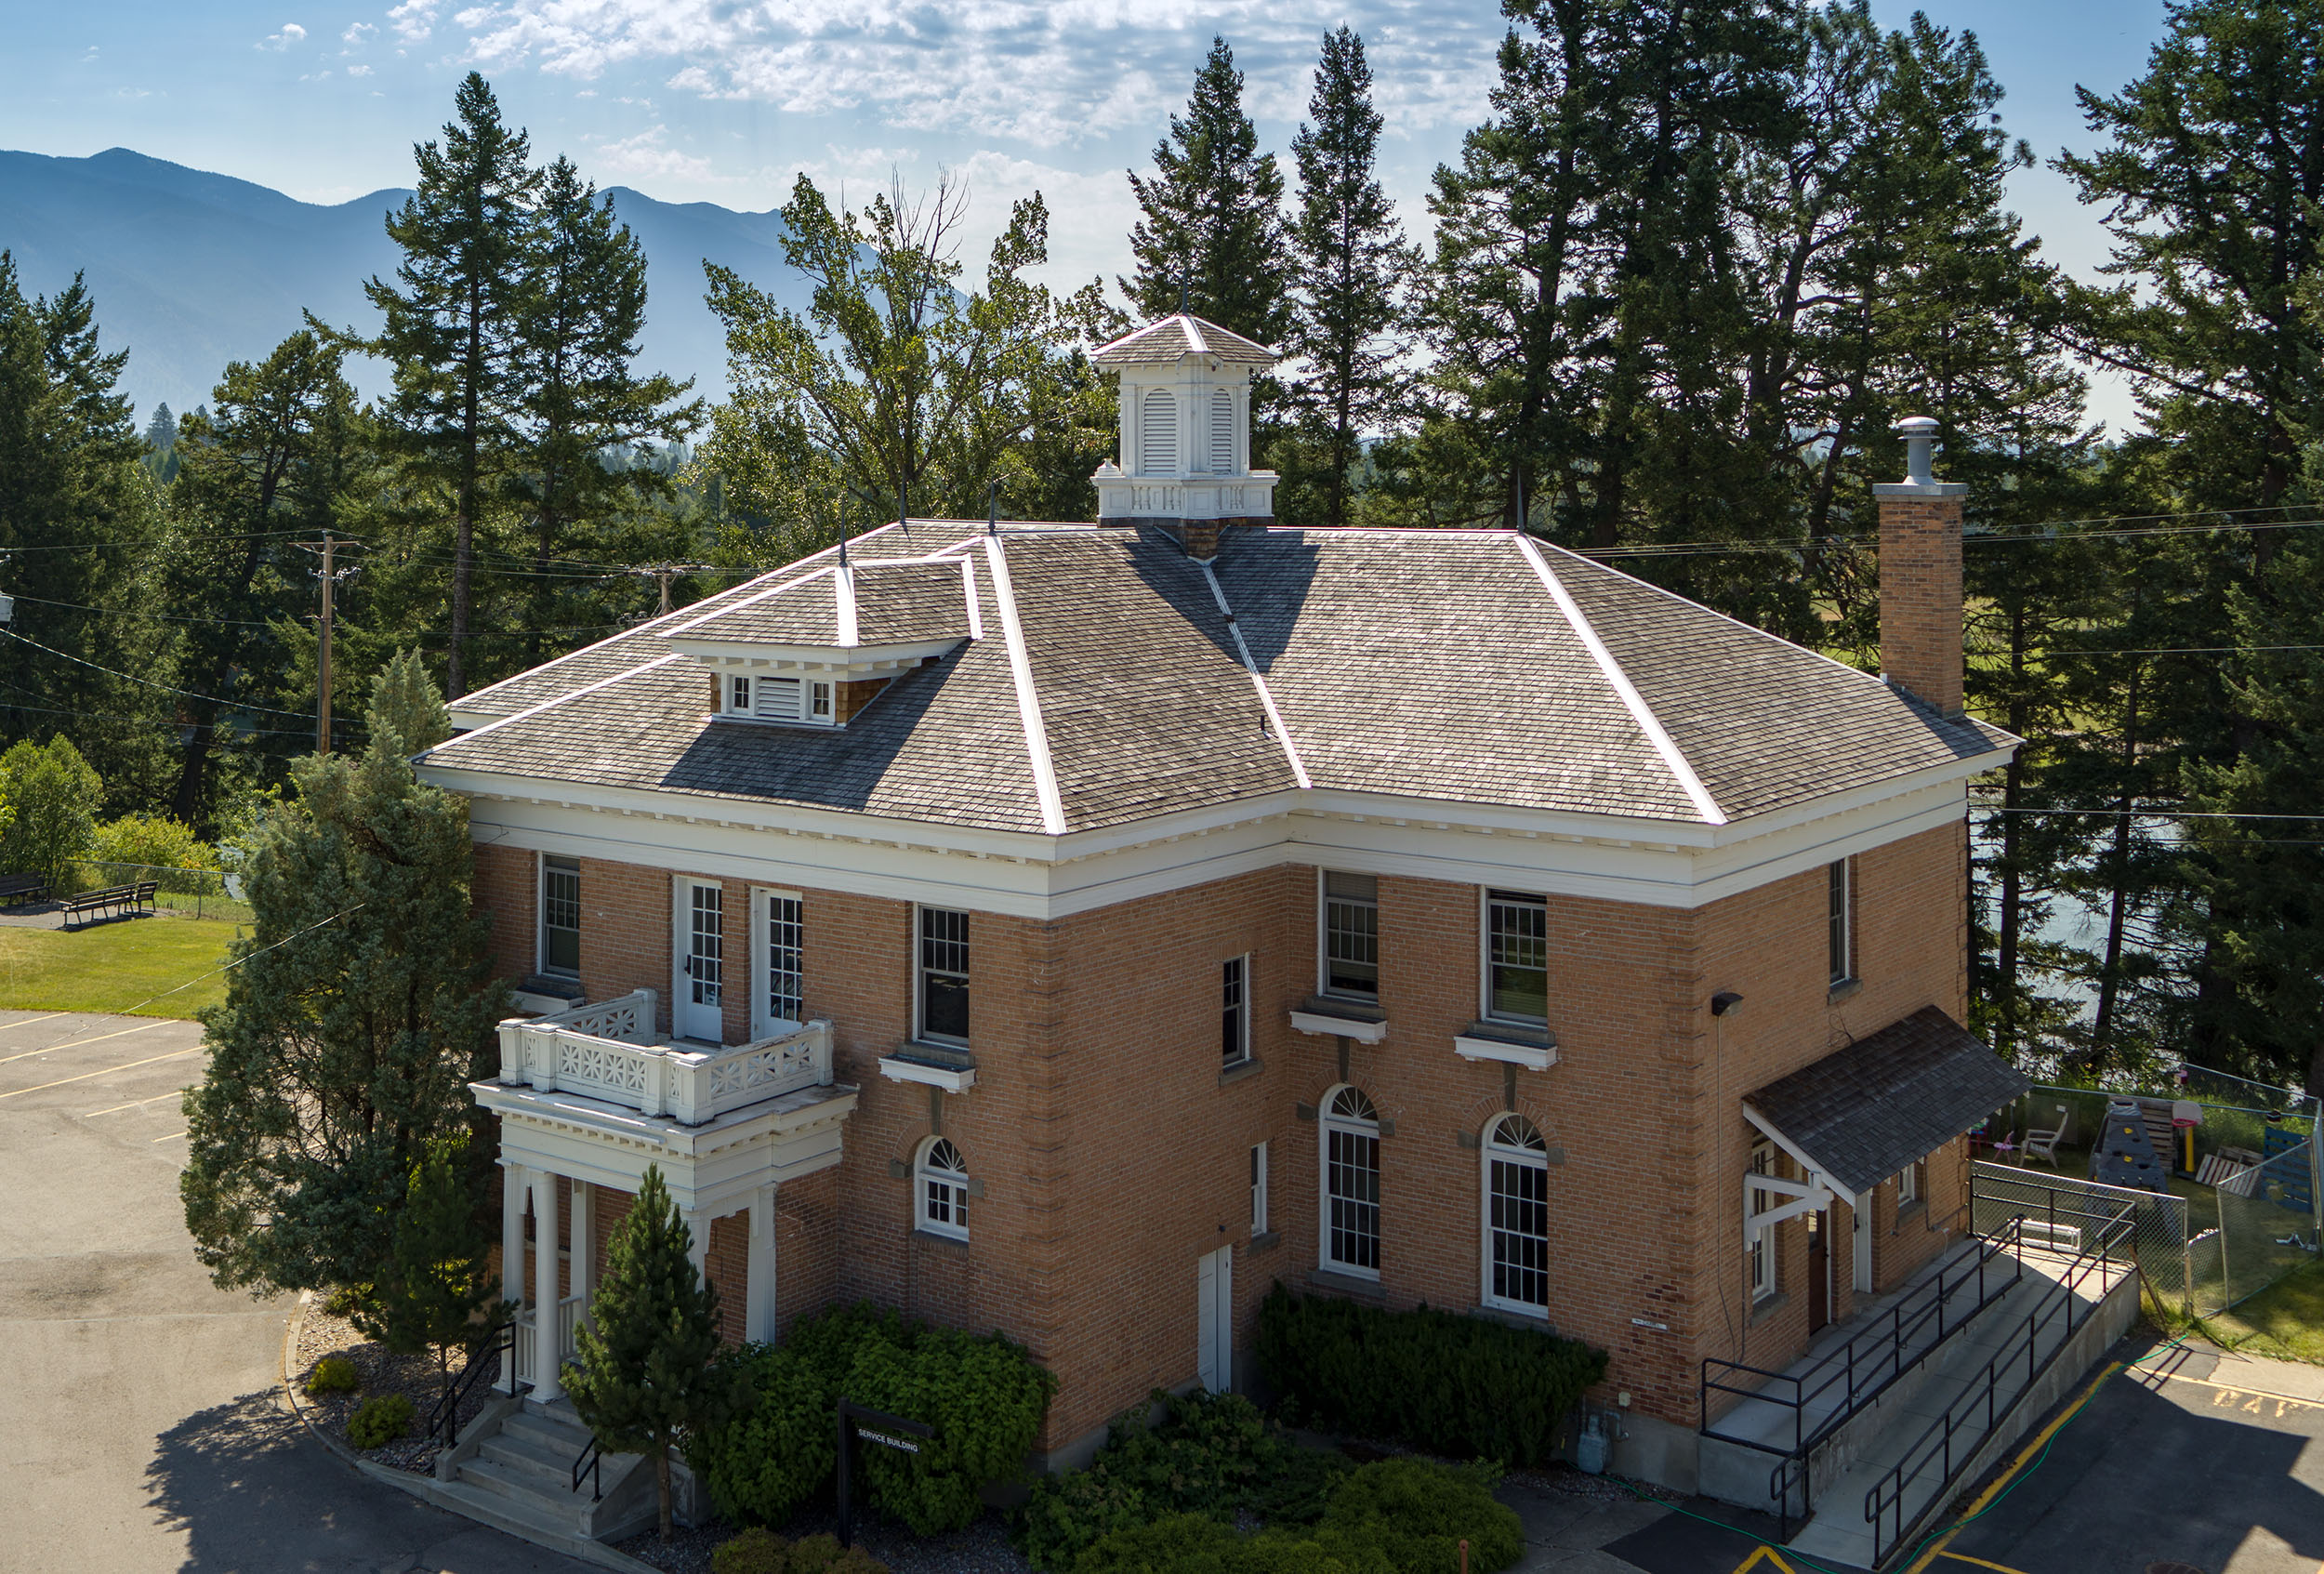 An aerial view of the main building of the Veterans Home. It is light brown brick with a slanted roof. There are pillars at the entrance door, with some trees and hedges at the front.